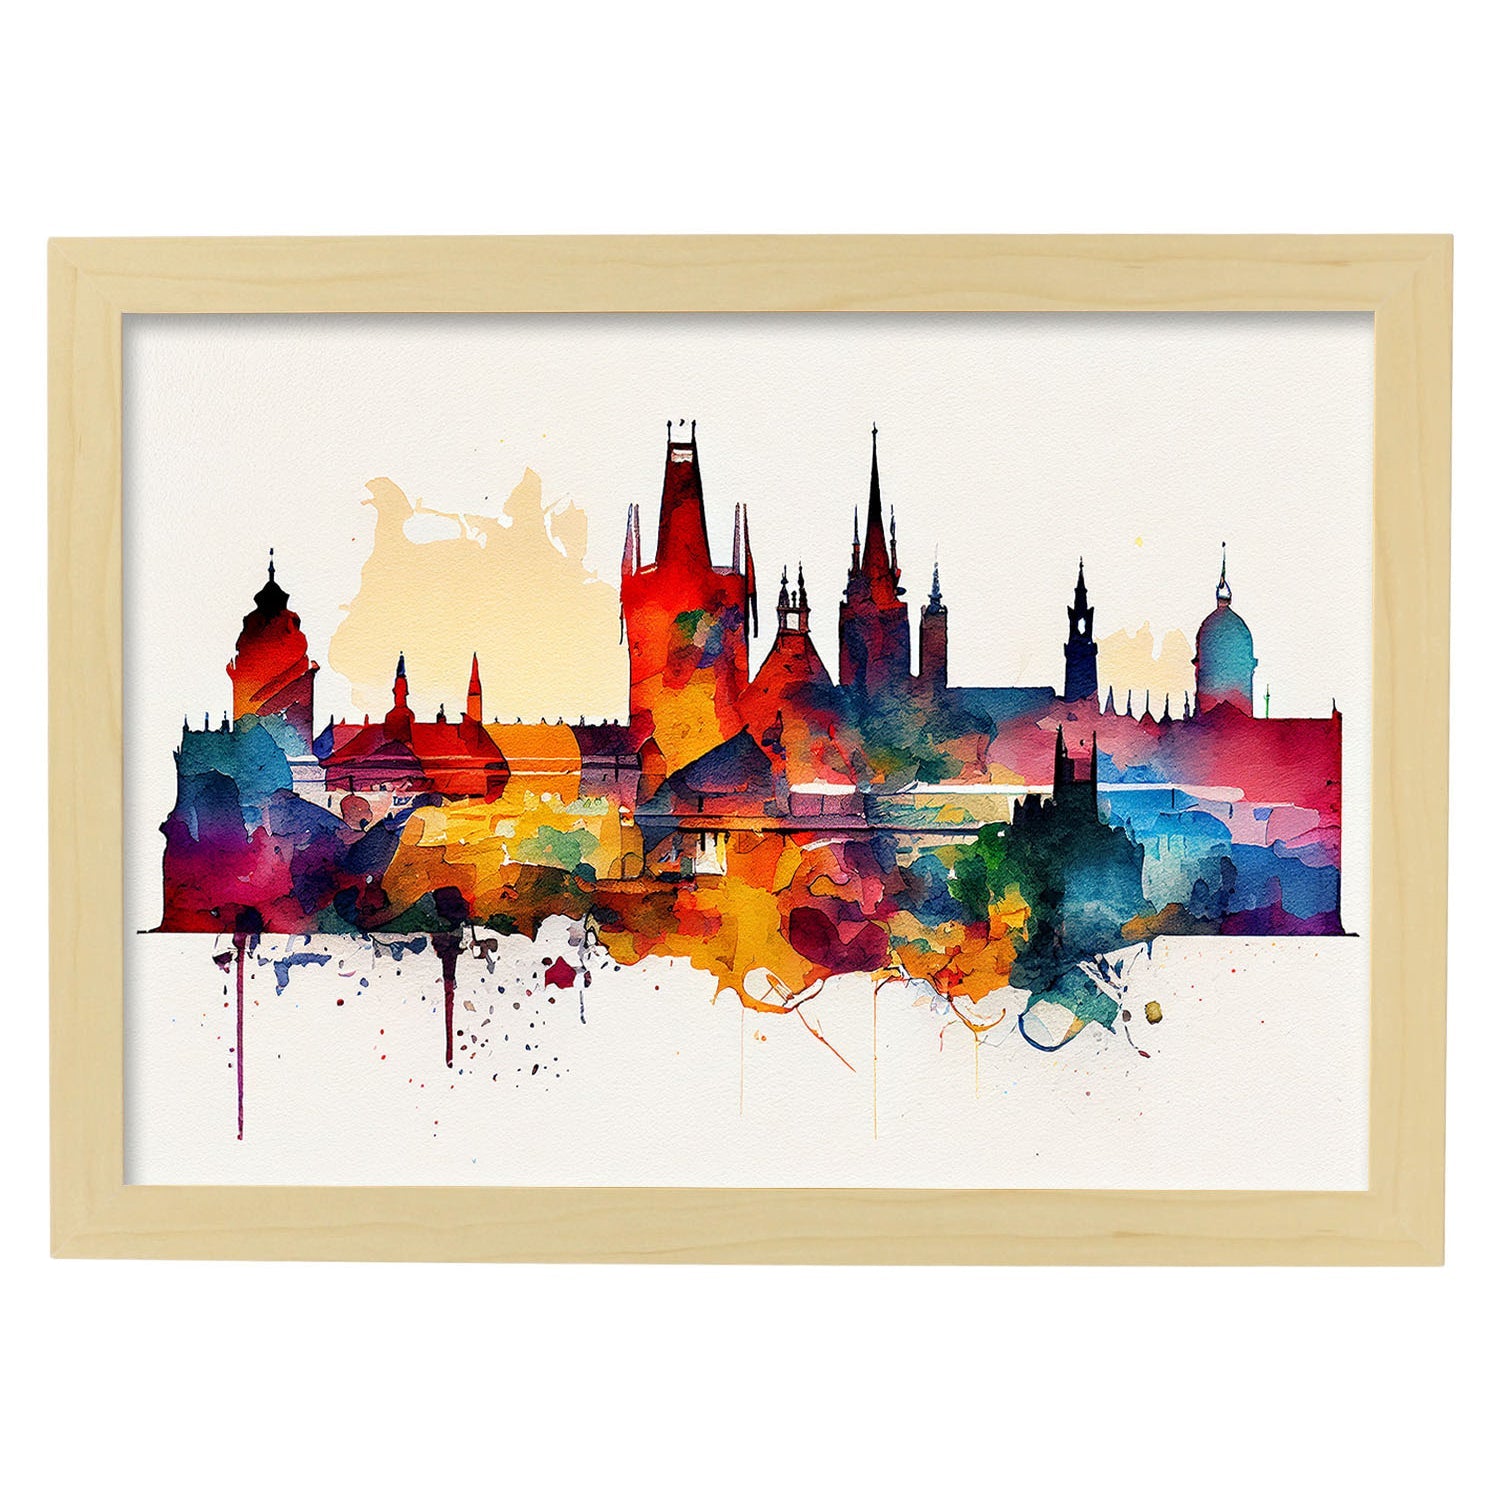 Nacnic watercolor of a skyline of the city of Prague_3. Aesthetic Wall Art Prints for Bedroom or Living Room Design.-Artwork-Nacnic-A4-Marco Madera Clara-Nacnic Estudio SL